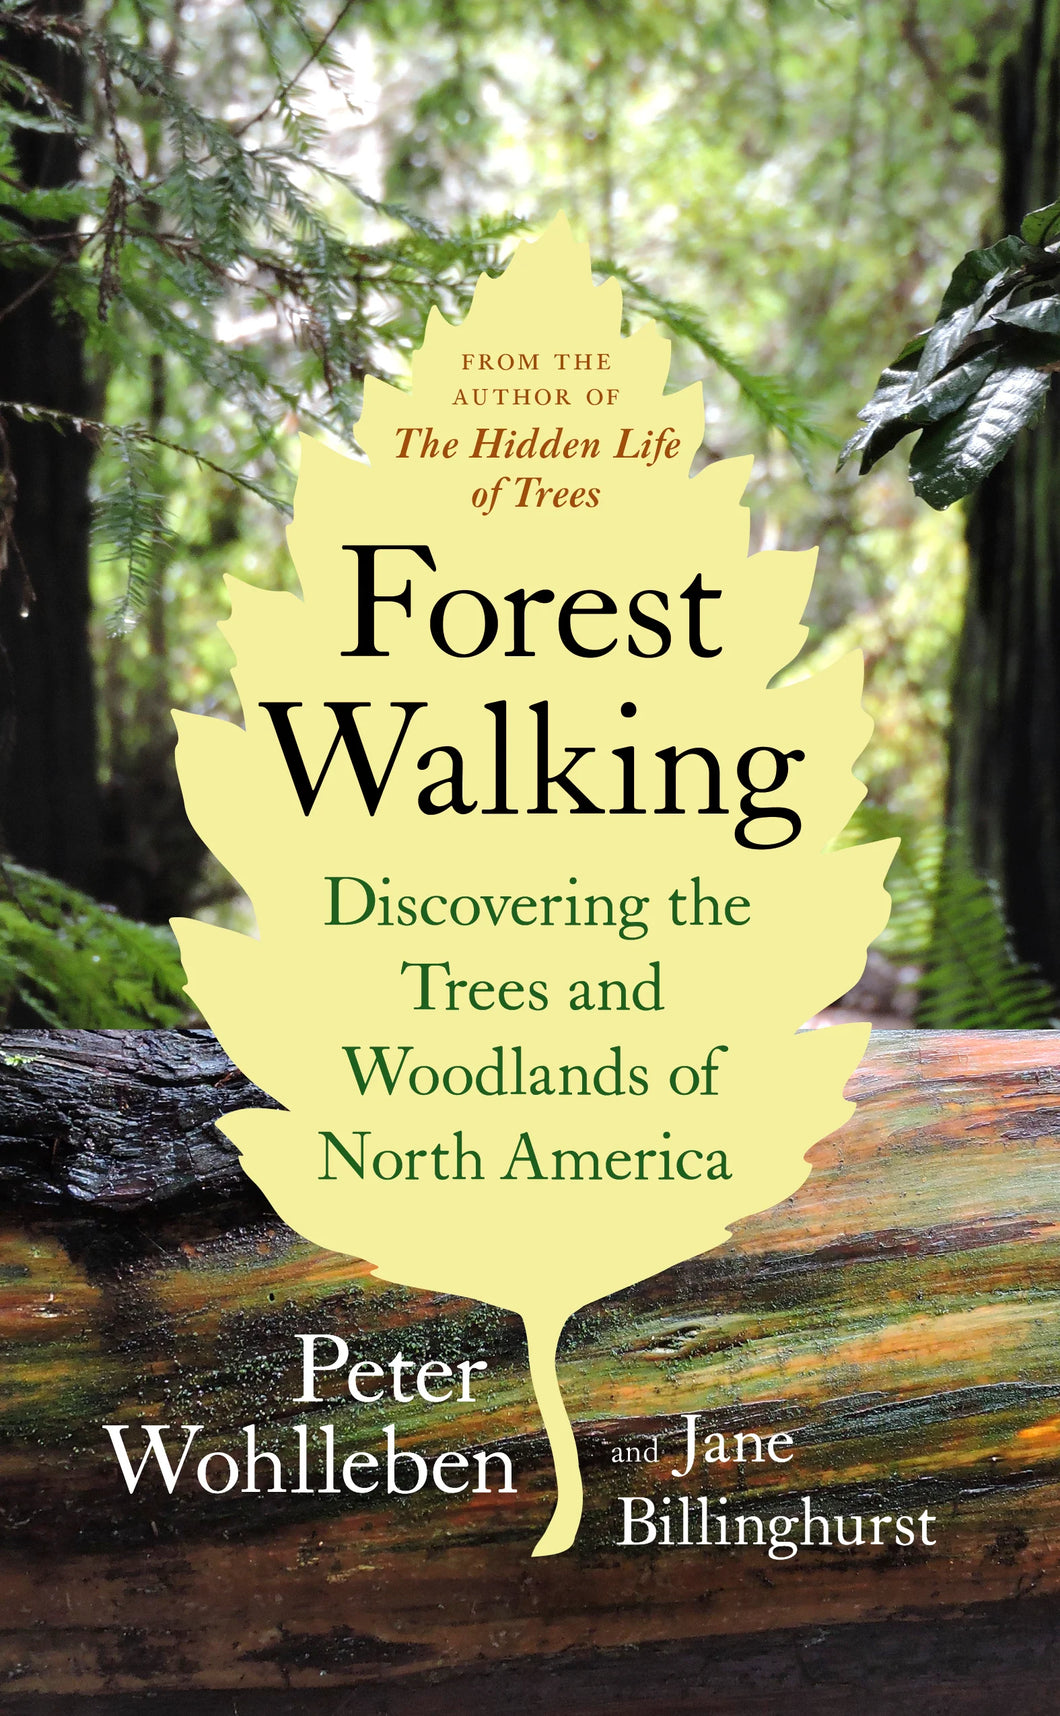 Forest Walking: Discovering the Trees and Woodlands of North America by  Peter Wohlleben & Jane Billinghurst